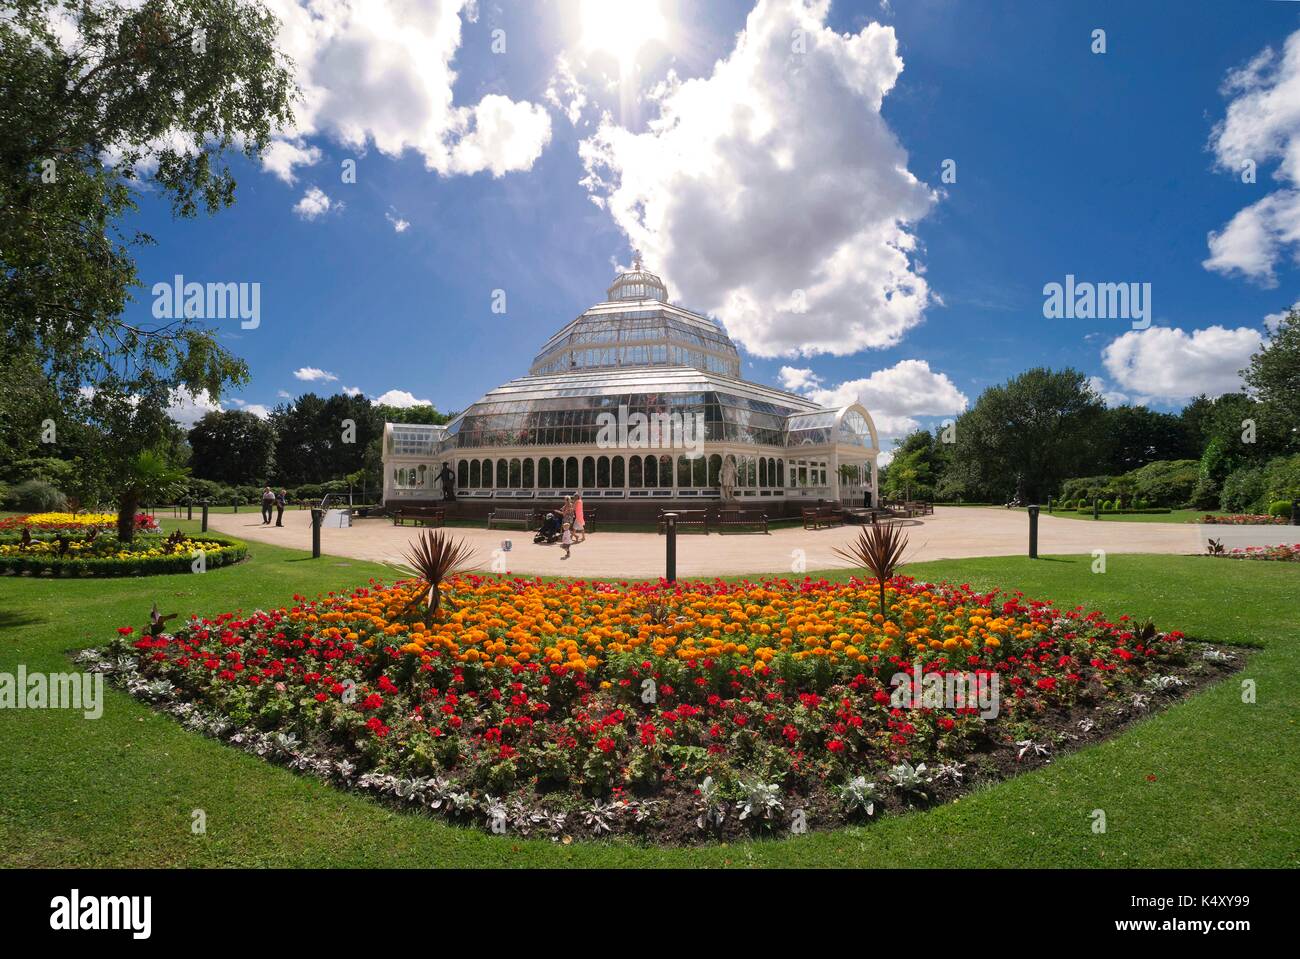 The magnificent iron and glass Palm House, Sefton Park, Liverpool, built 1896 by Mackenzie and Moncur, Glasgow, and gifted by Henry Yates Thompson. Stock Photo